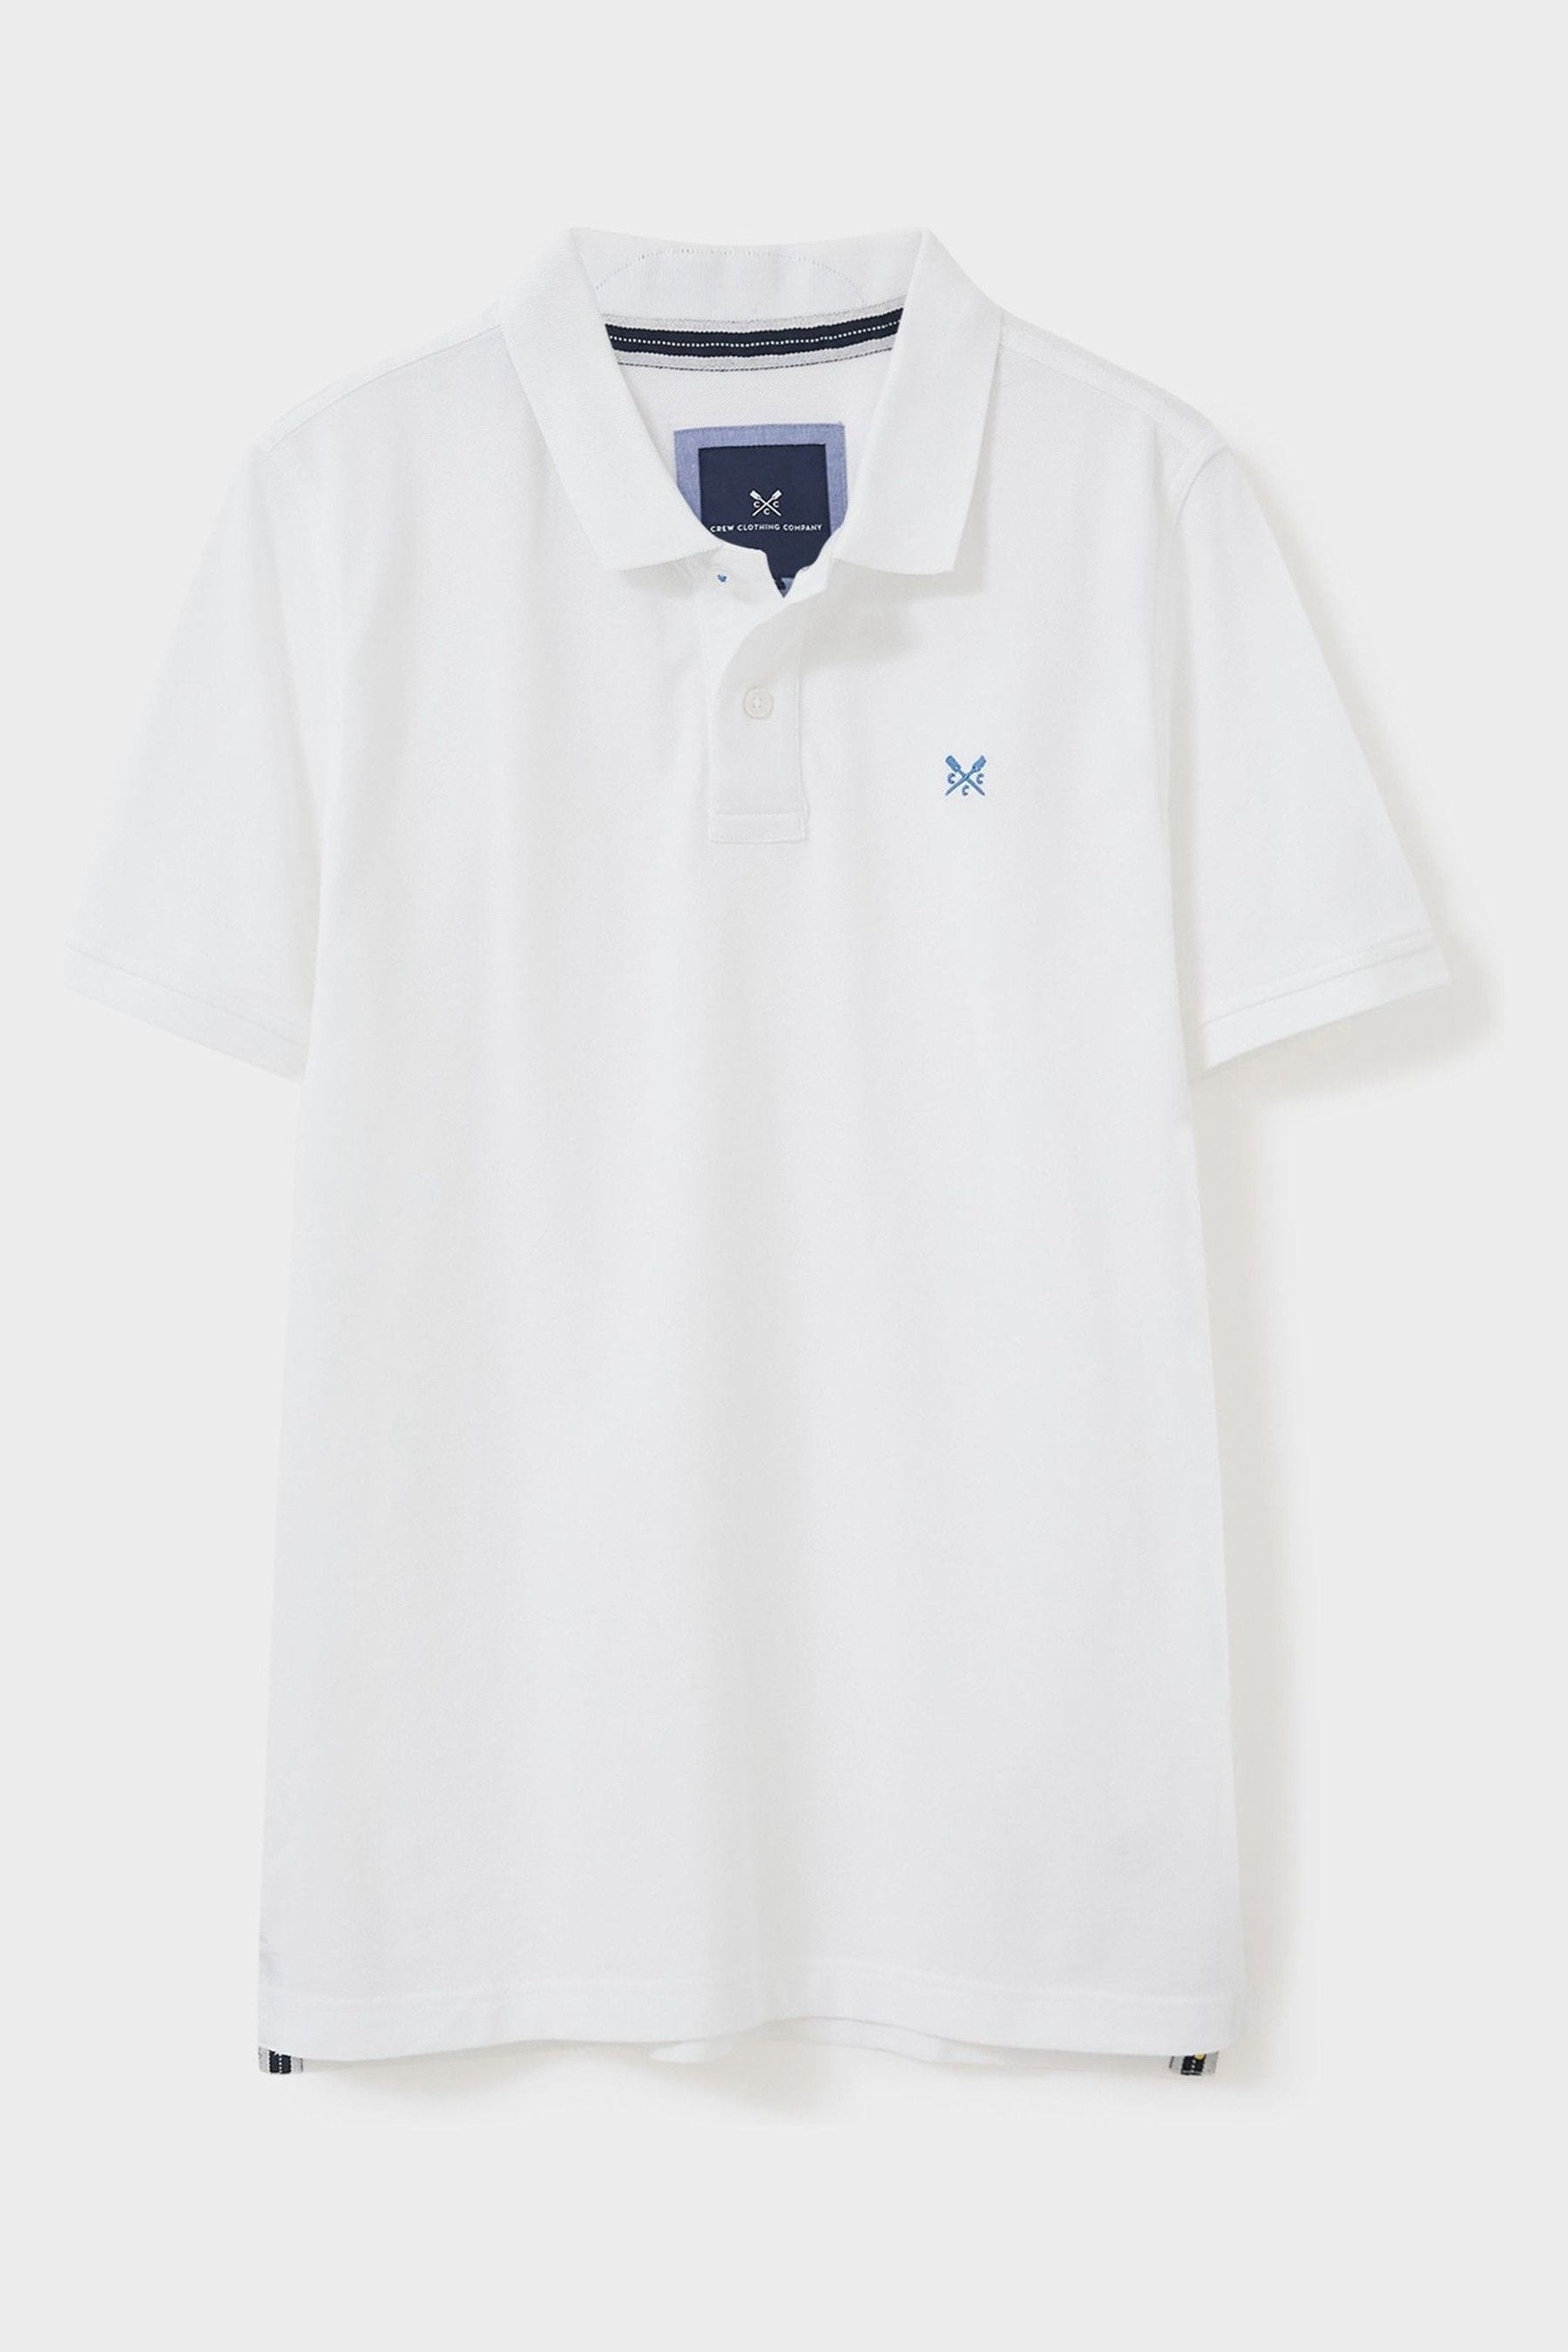 Buy Crew Clothing Company White Cotton Classic Polo Shirt: from the ...